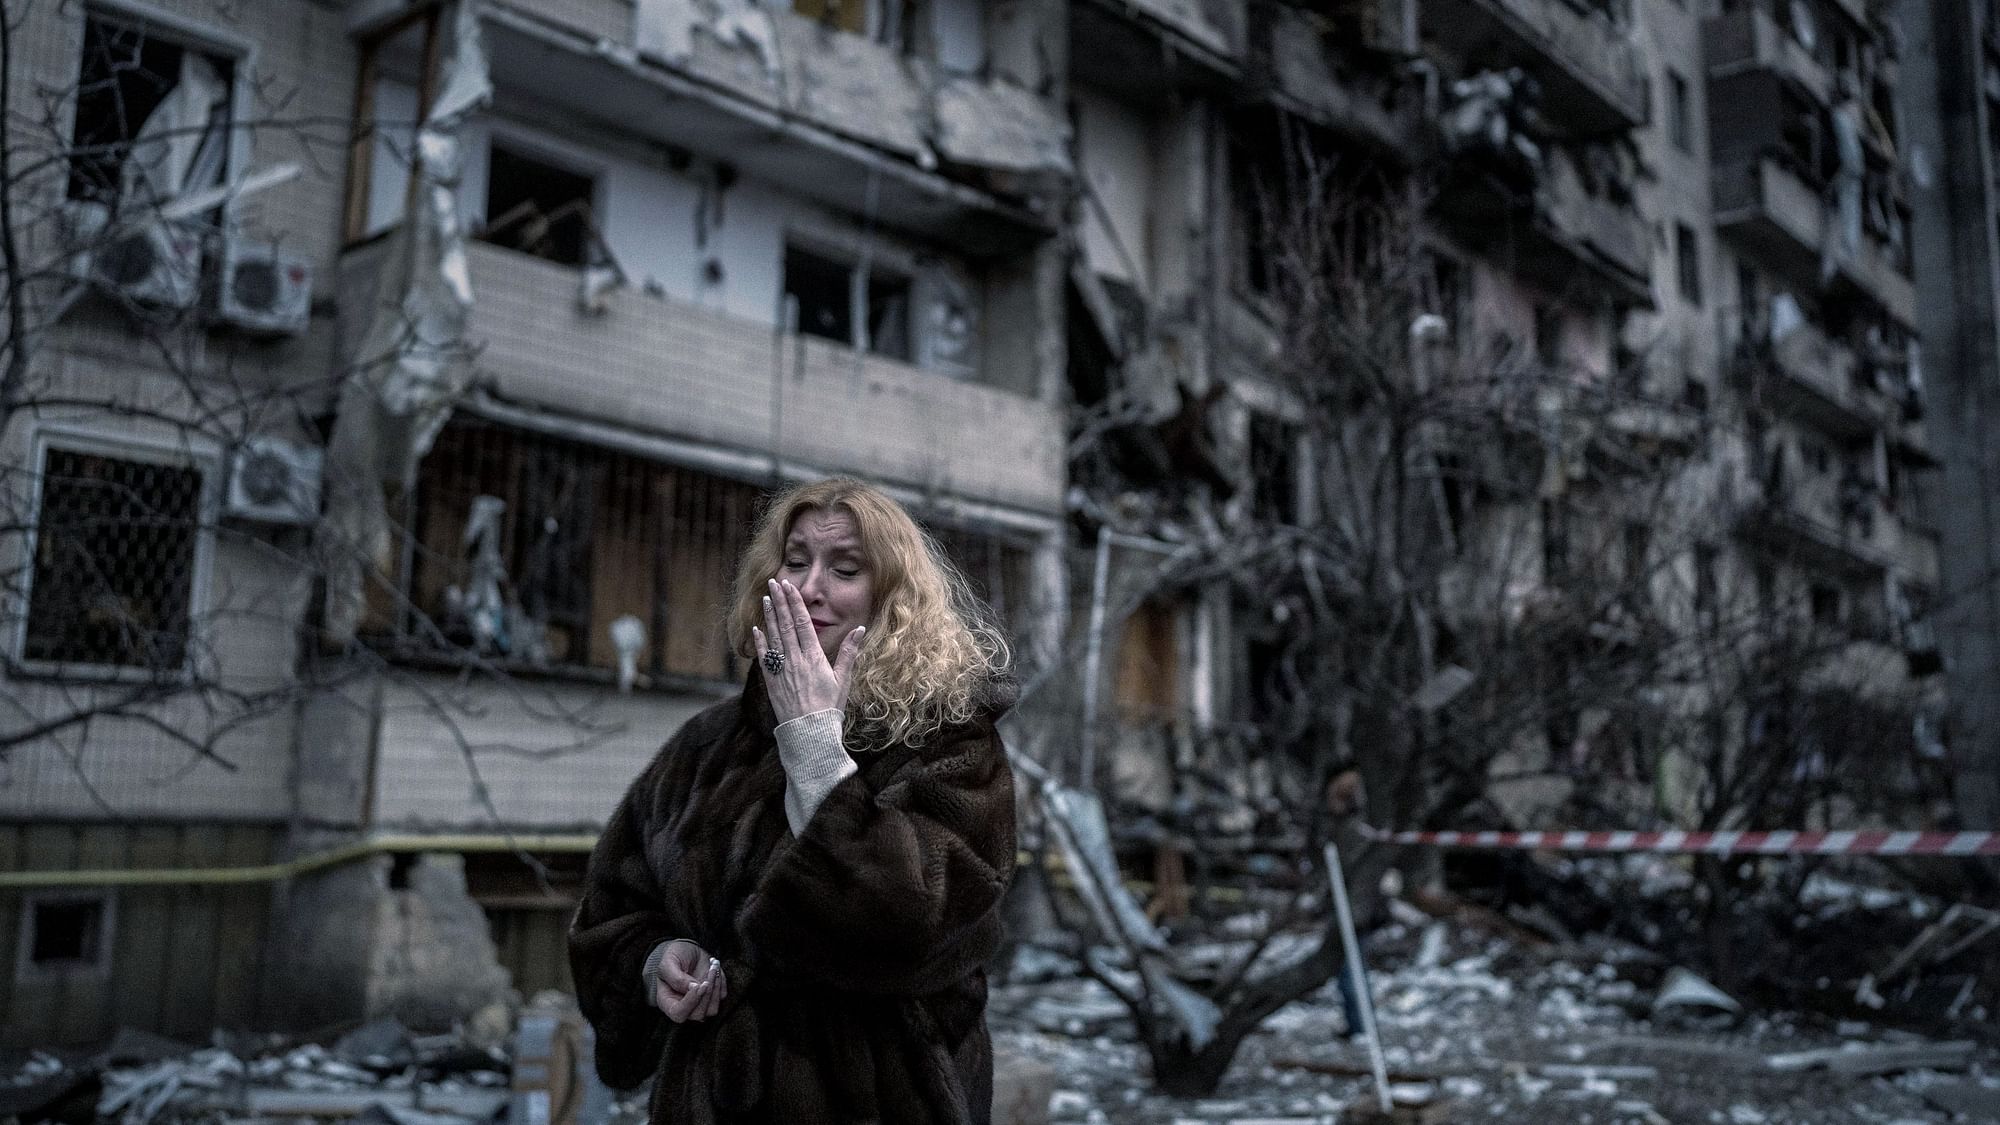 <div class="paragraphs"><p>A Ukrainian woman weeps after her house was destroyed in the ongoing war. Photo for representation.&nbsp;</p></div>